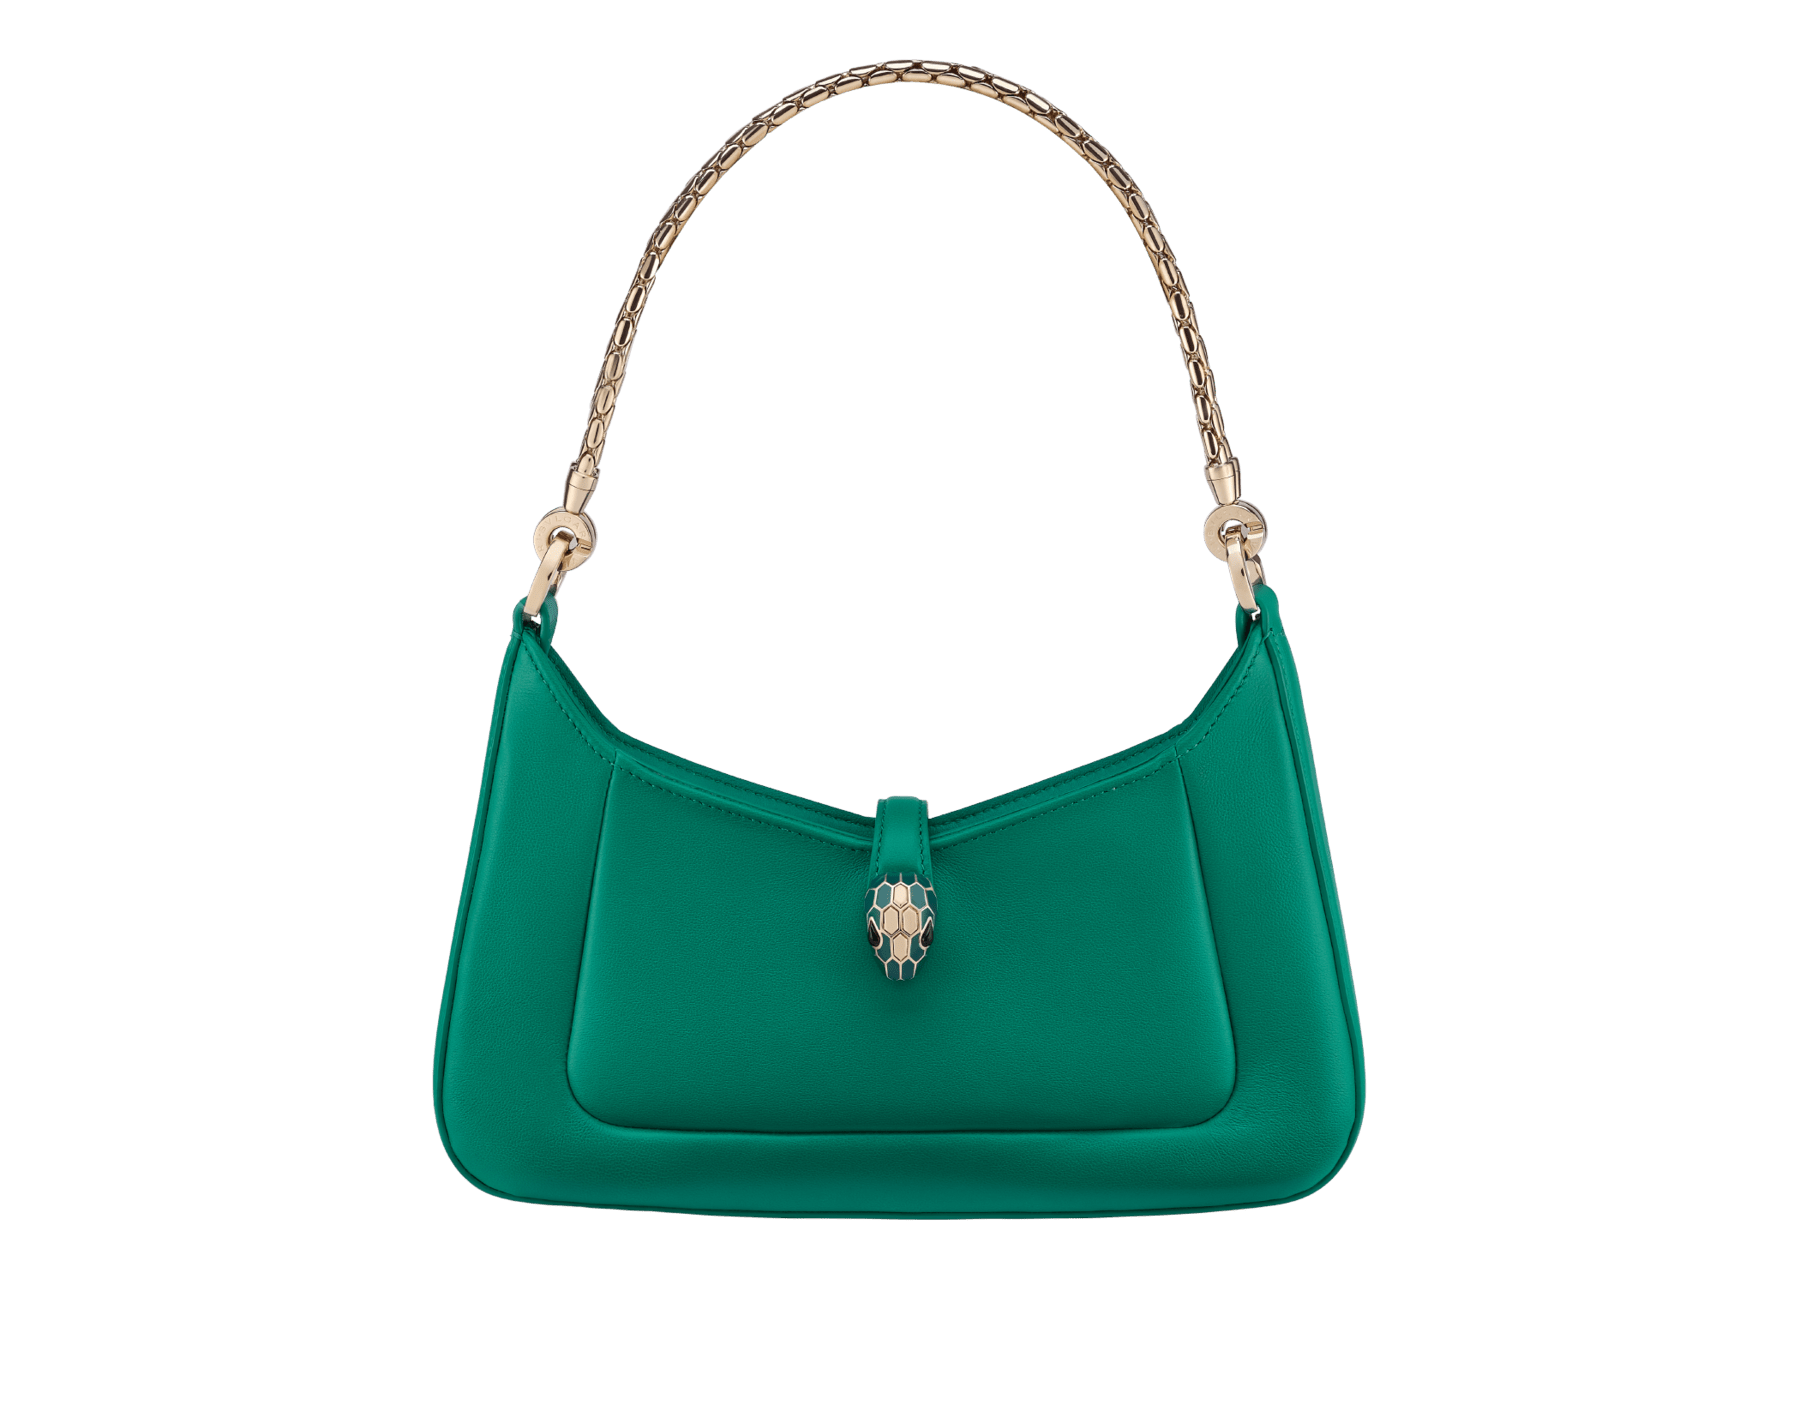 Serpenti Baia small shoulder bag in vivid emerald green Metropolitan calf leather with black nappa leather lining. Captivating snakehead magnetic closure in light gold-plated brass embellished with bright forest emerald green enamel and light gold-plated brass scales, and black onyx eyes; additional zipped top closure. SEA-1274 image 1